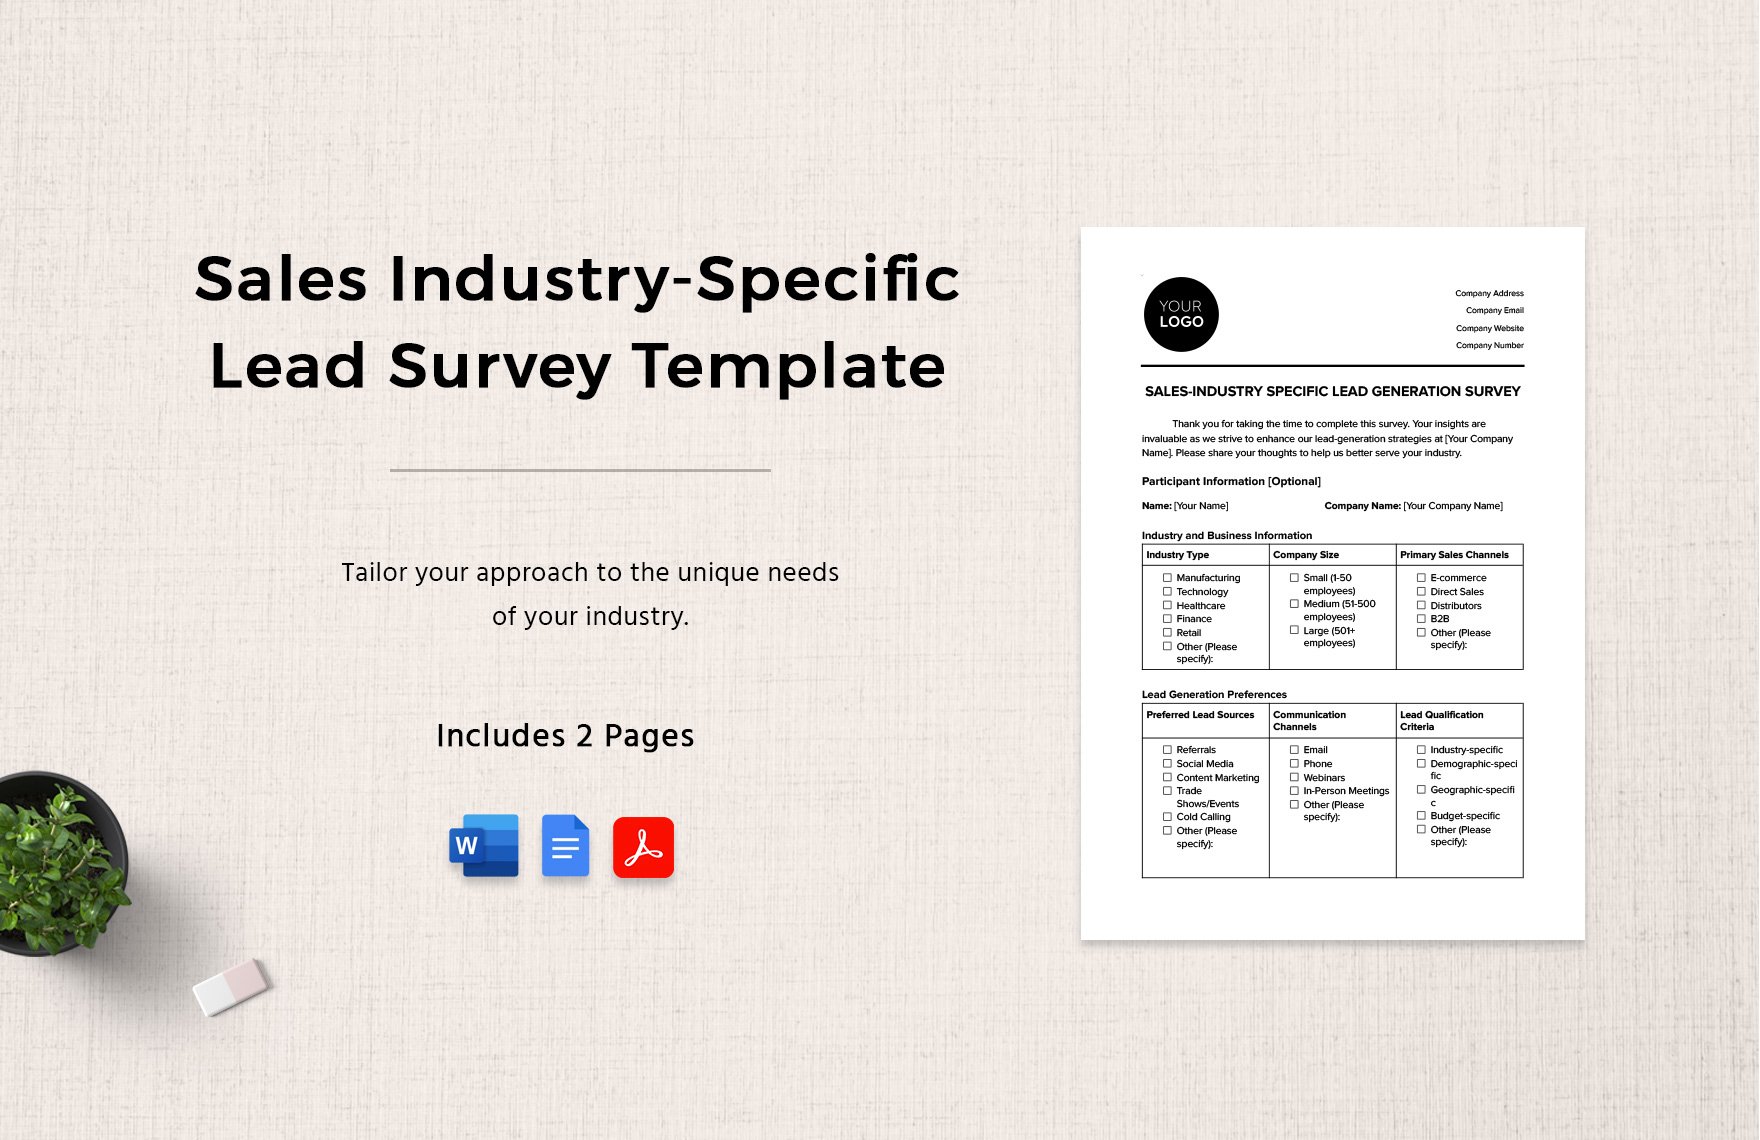 Sales Industry-Specific Lead Survey Template